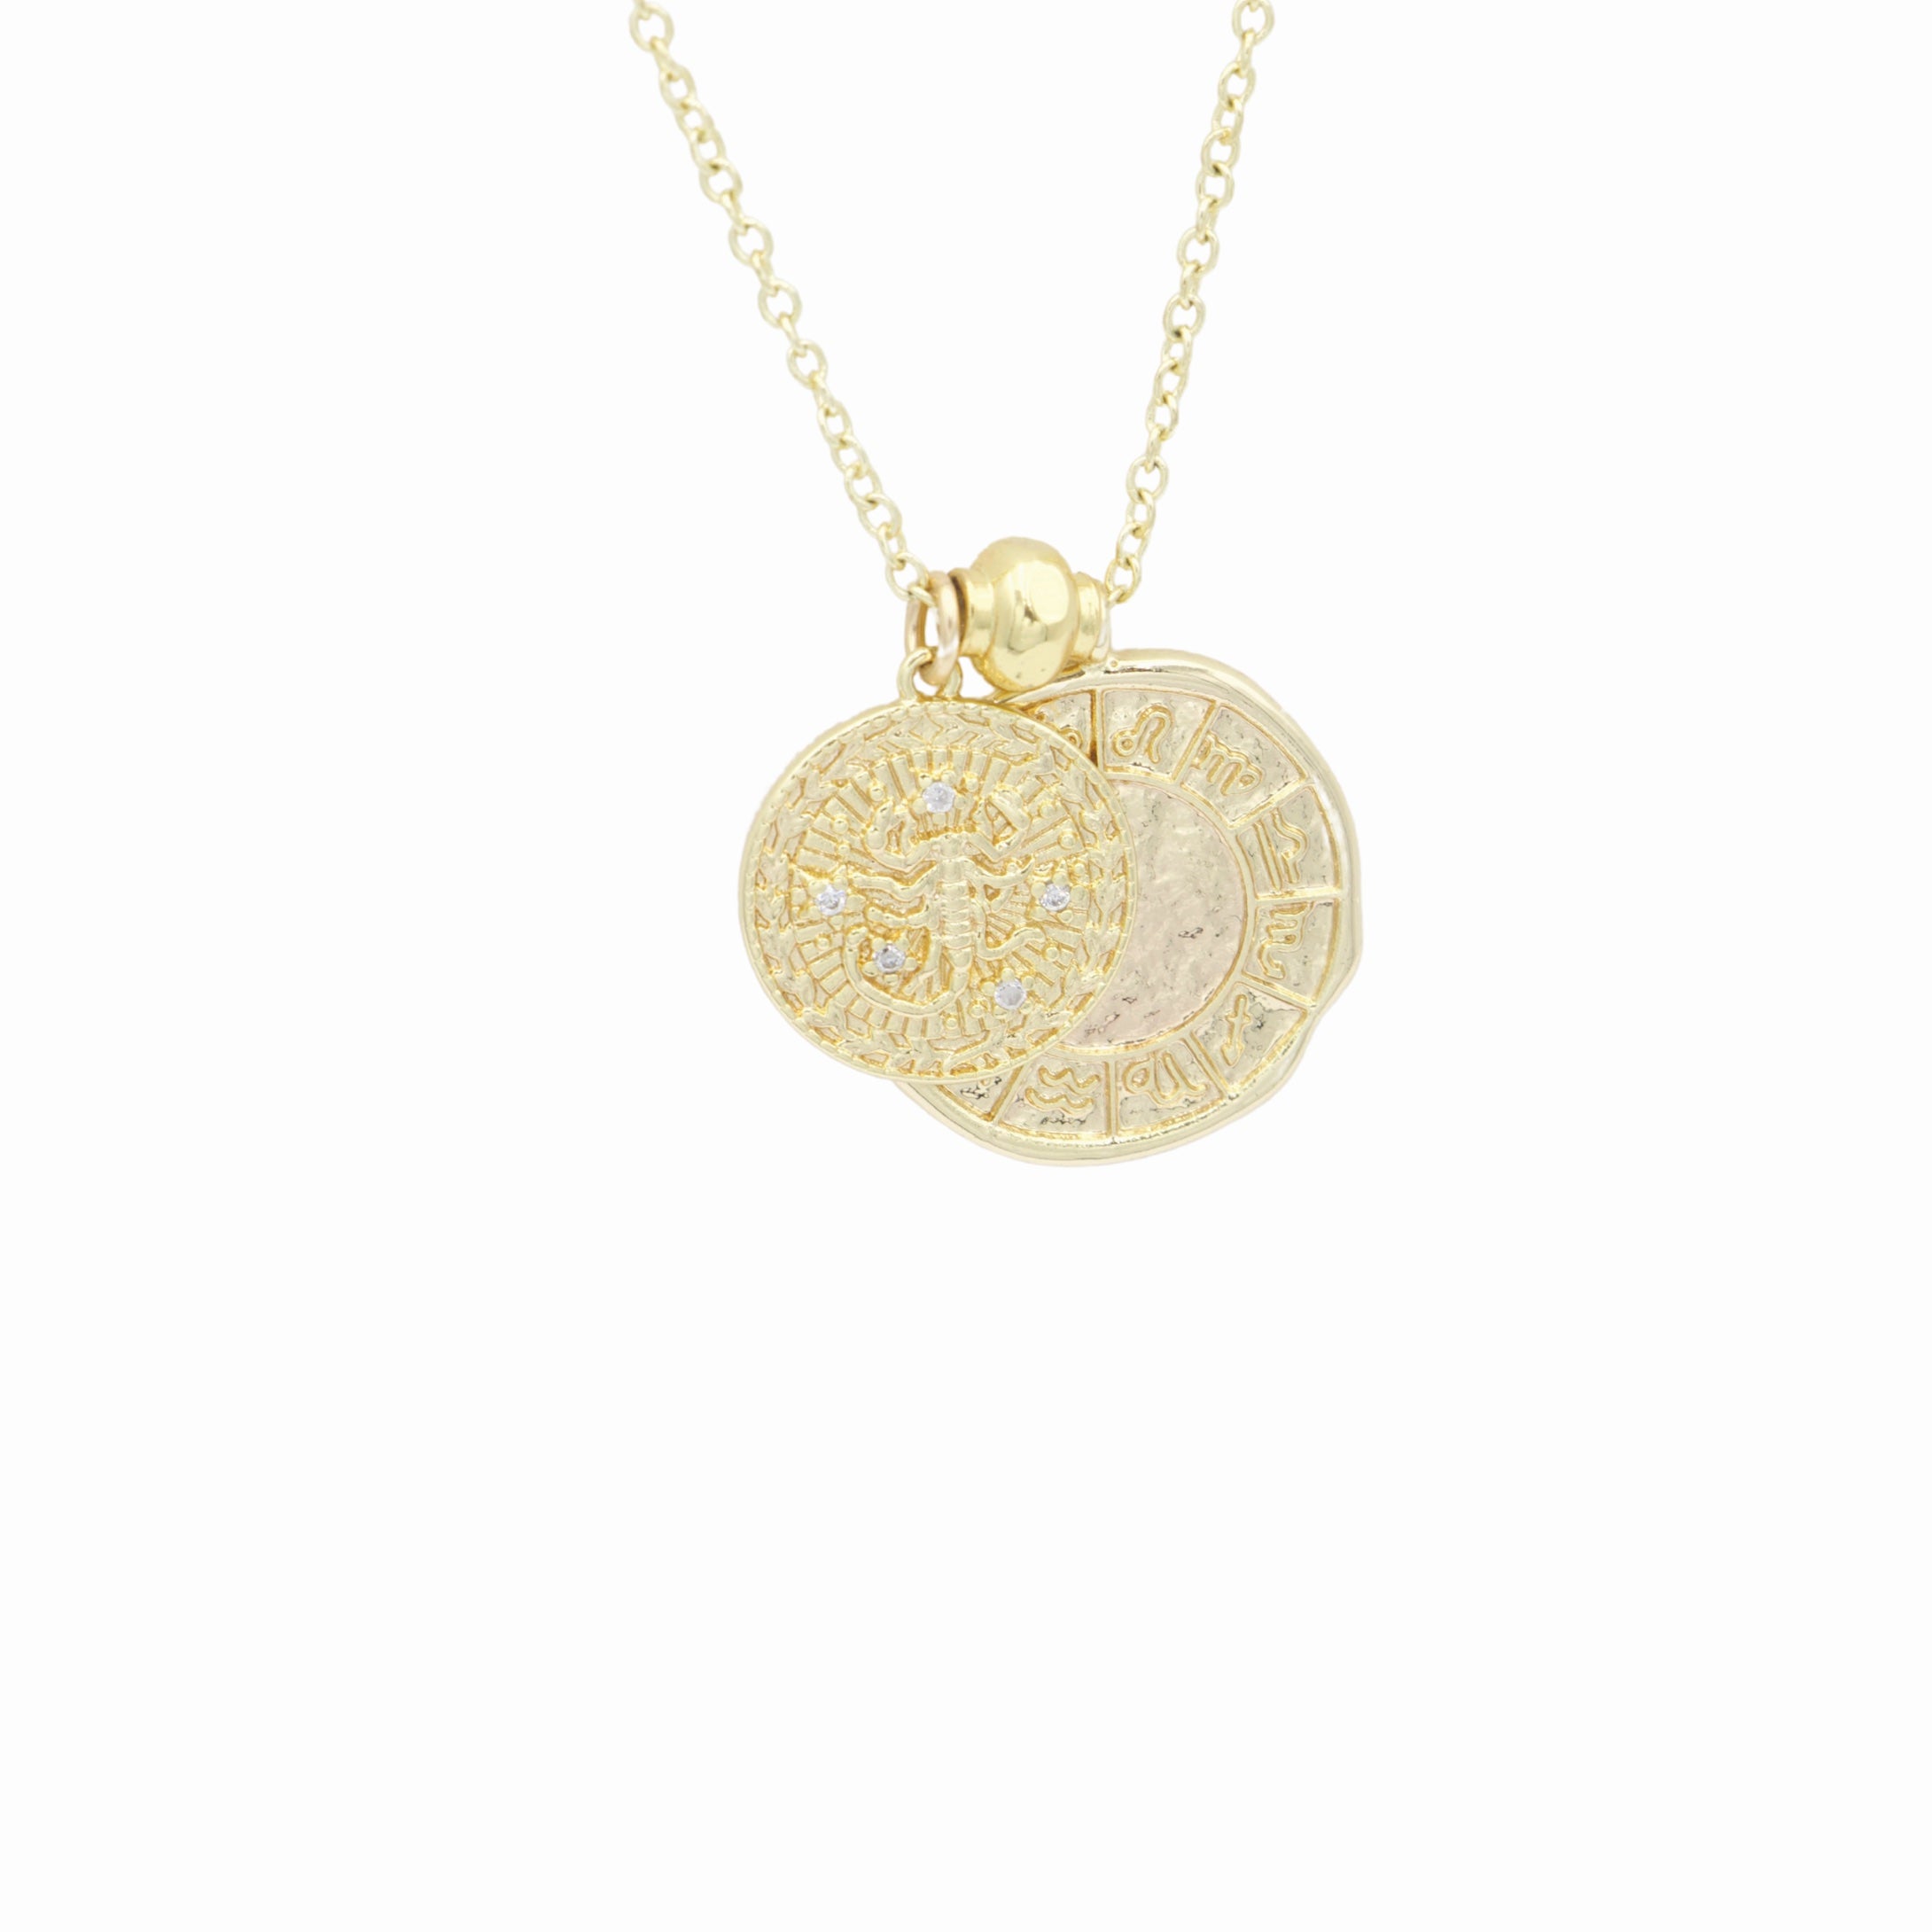 AW Boutique's dual zodiac coin necklace featuring a dainty necklace chain, zodiac rustic coin charm, and your chosen star sign coin charm. Charms separated by a gold bead. Part of the Celestial Collection. Gold filled jewellery. Option shown is Scorpio.